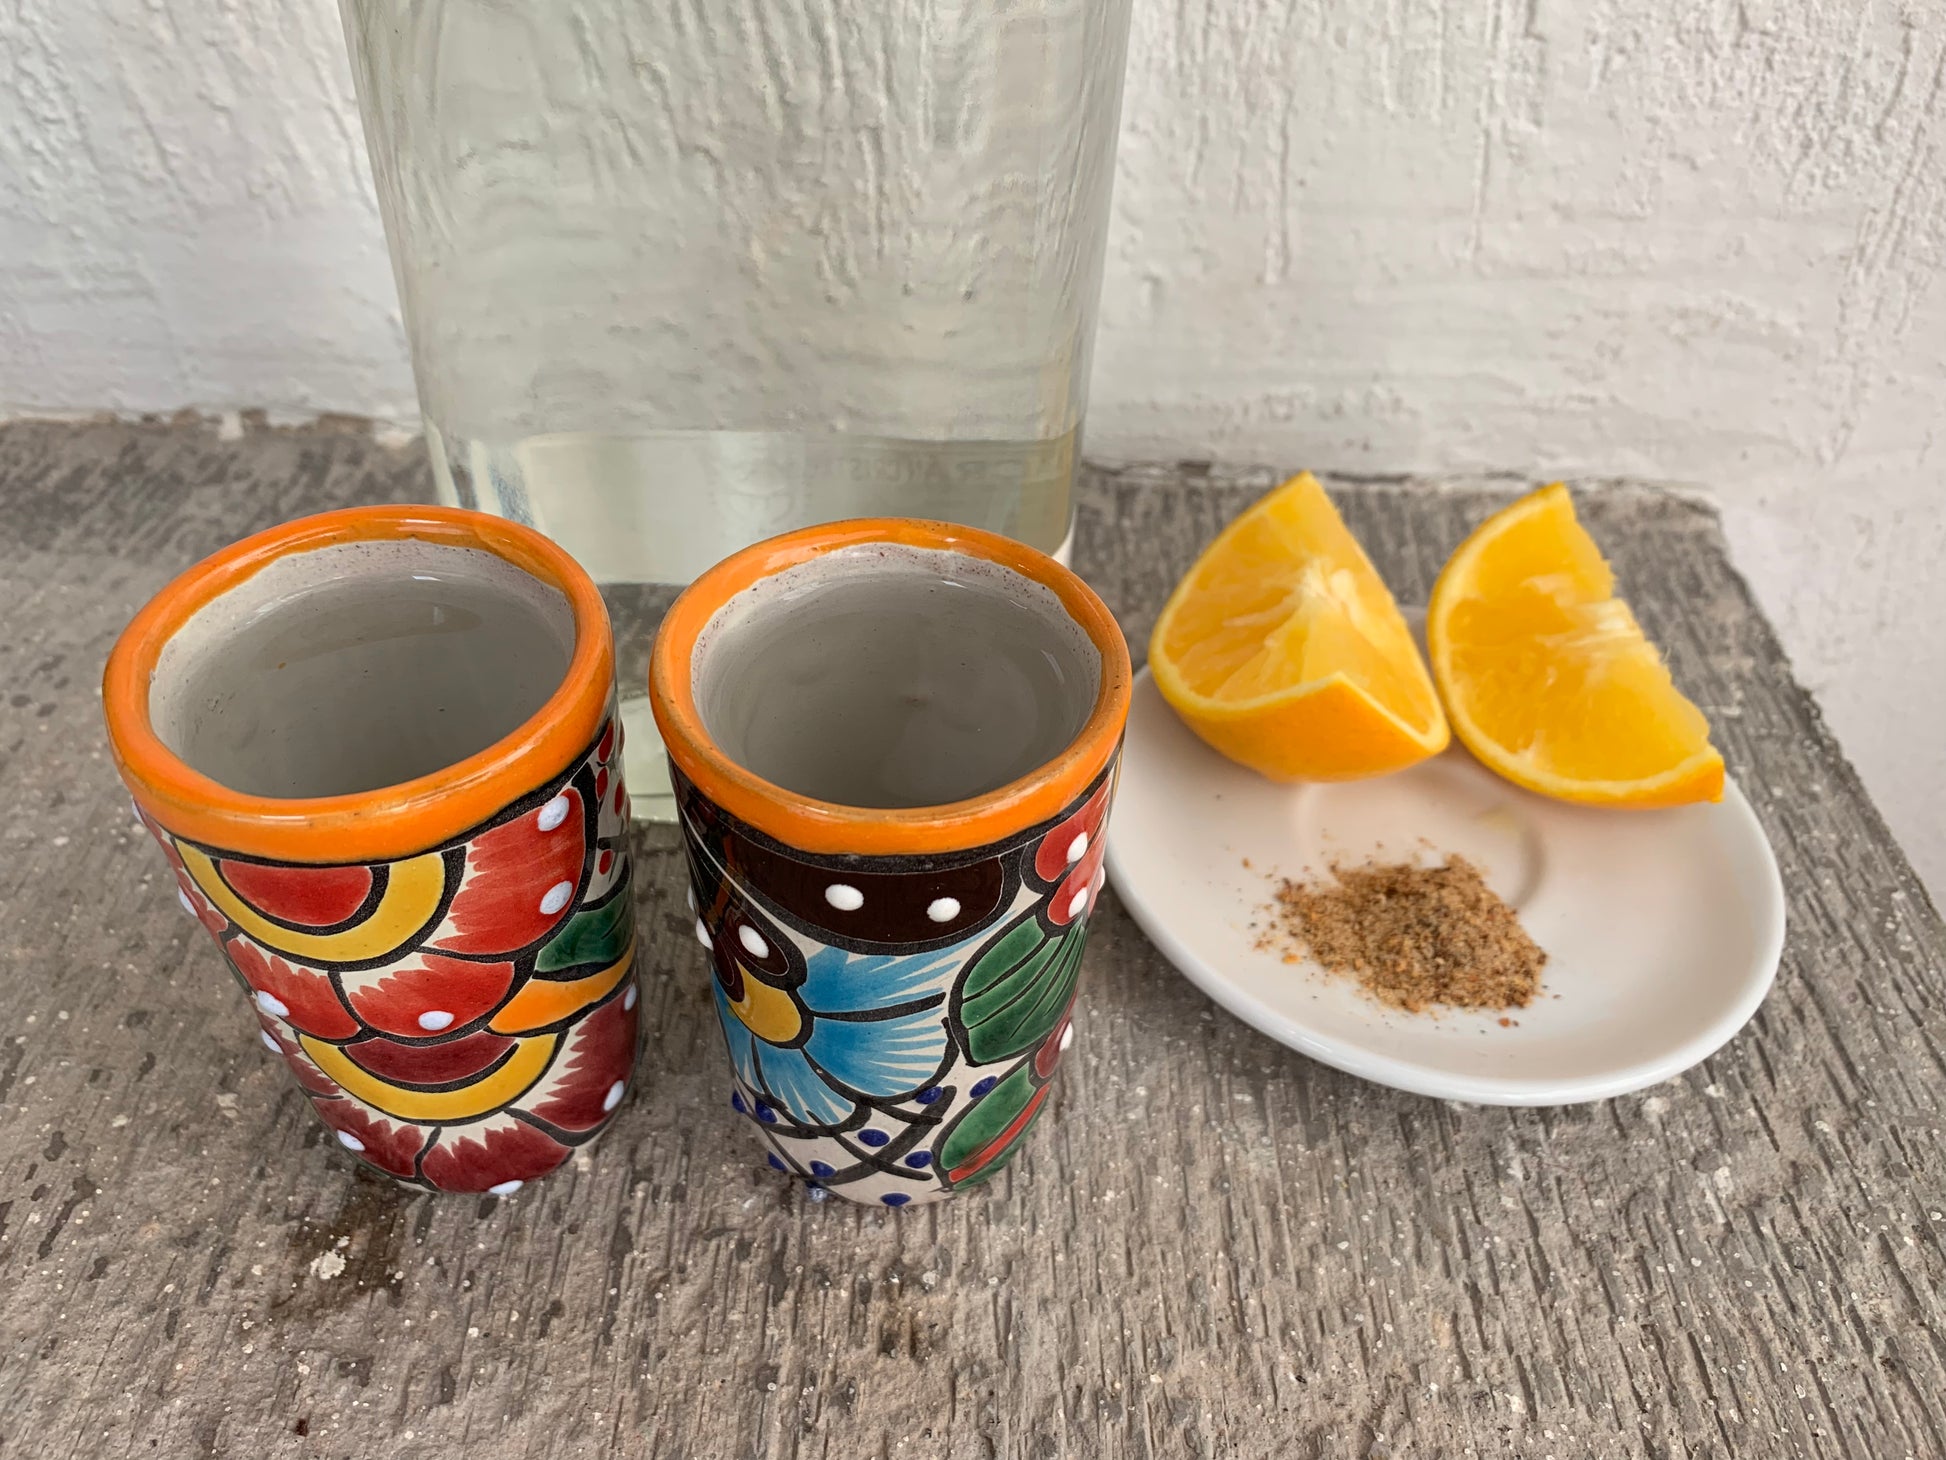 Colorful Mexican handmade tequilero shot set (2 ceramic shots), featuring multicolor Mexican folk art, made in Mexico for an authentic experience